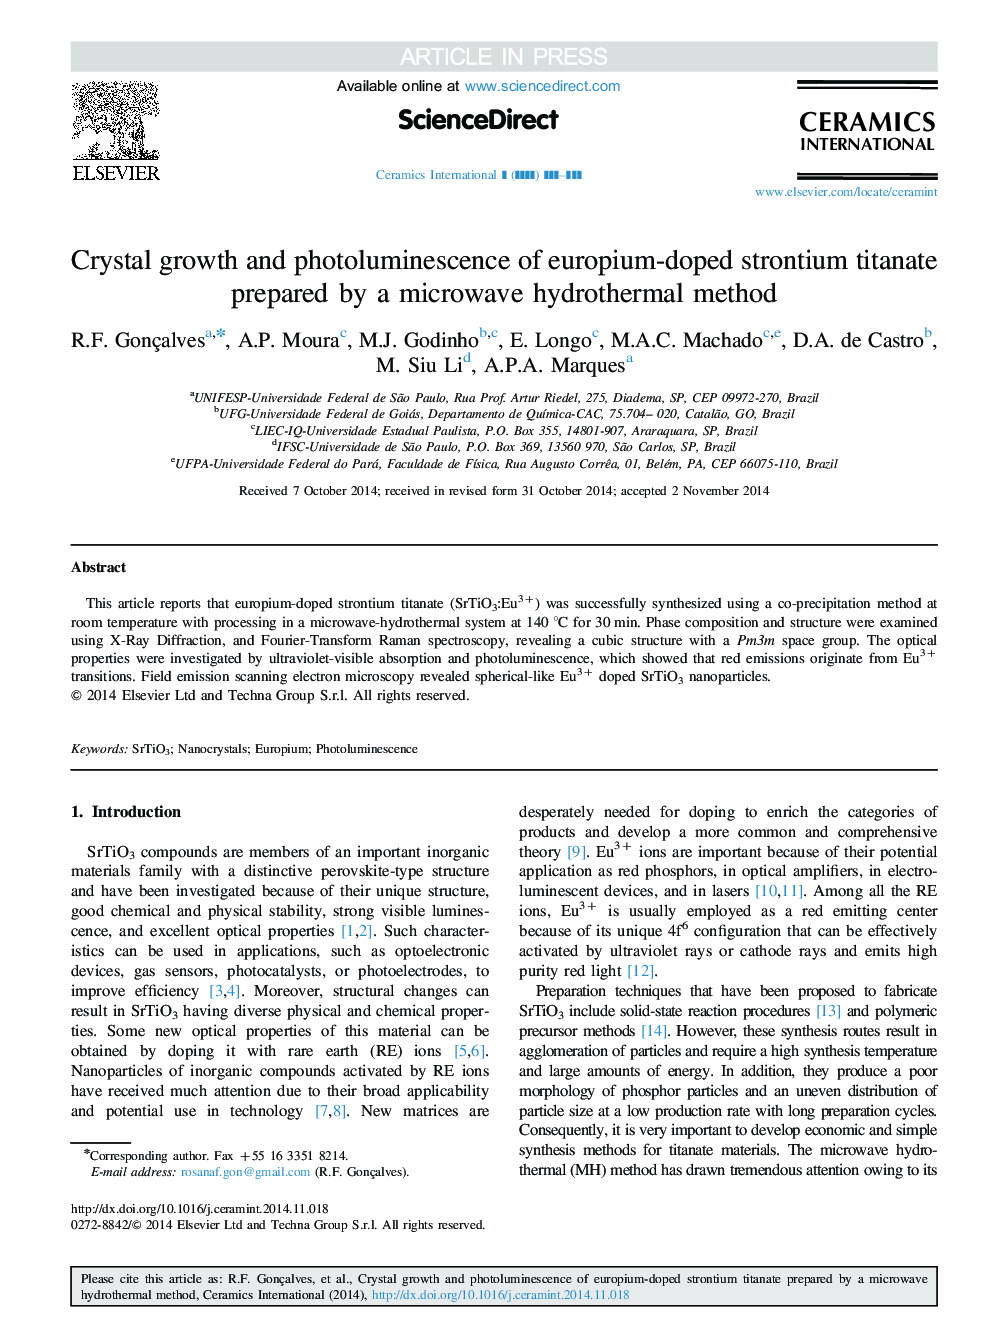 Crystal growth and photoluminescence of europium-doped strontium titanate prepared by a microwave hydrothermal method